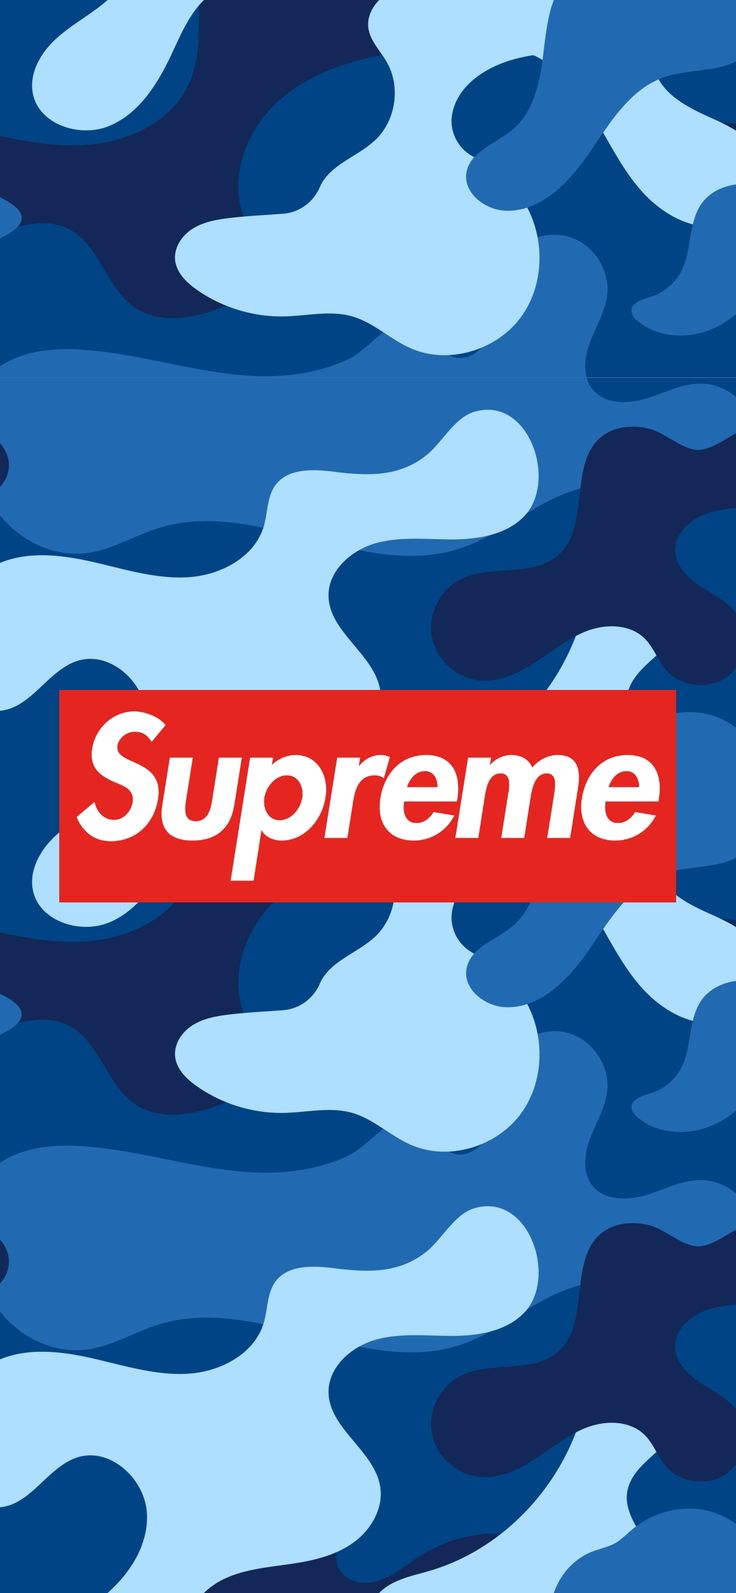 Supreme Camo iPhone Wallpaper with high-resolution 1080x1920 pixel. You can use this wallpaper for your iPhone 5, 6, 7, 8, X, XS, XR backgrounds, Mobile Screensaver, or iPad Lock Screen - Supreme